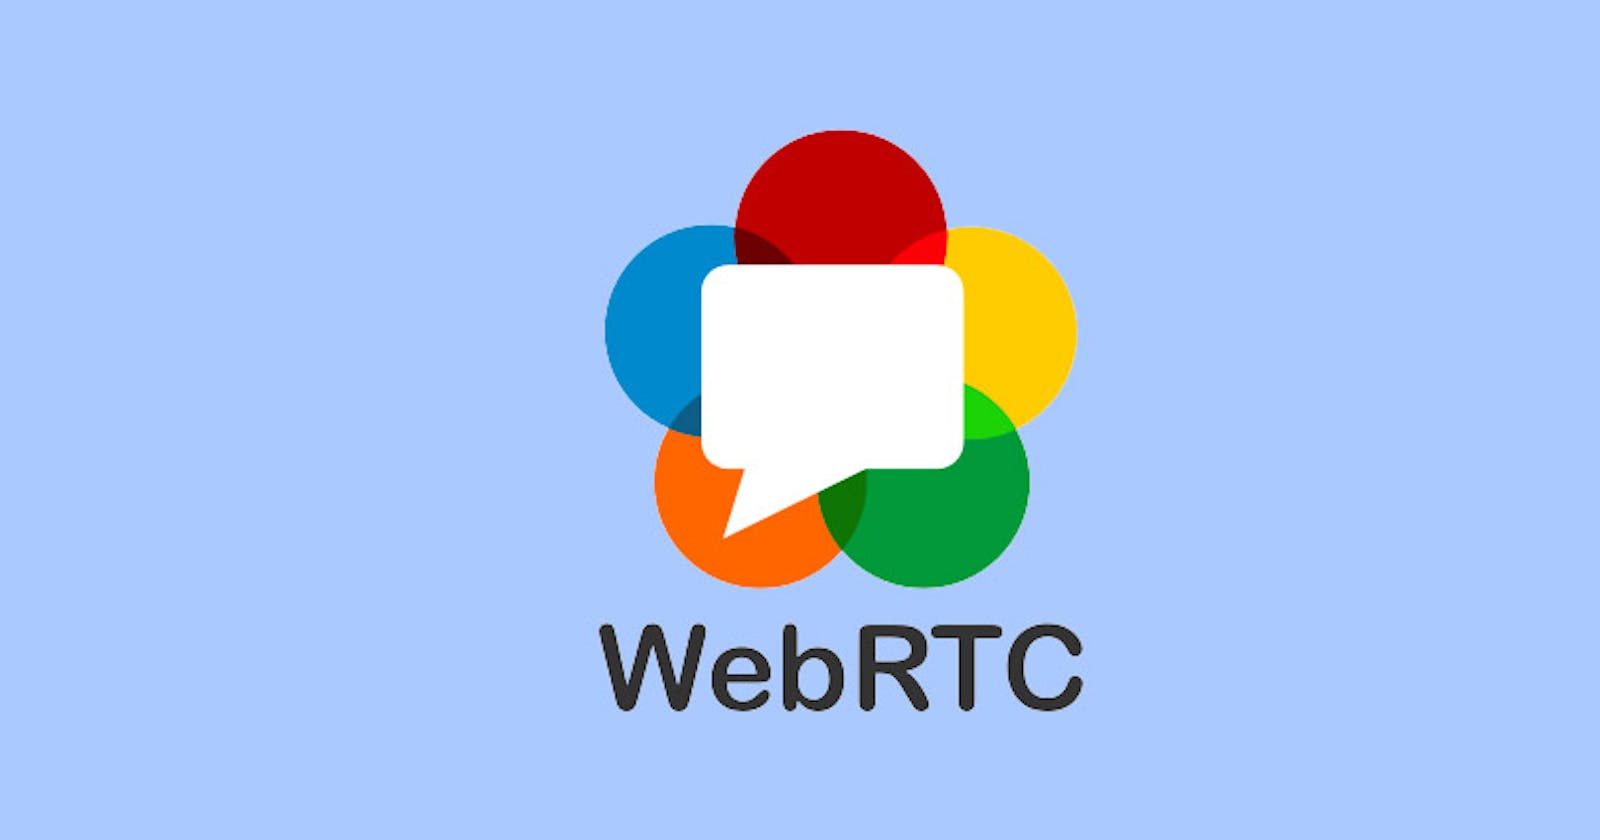 The magic of WebRTC: video communication made easy with WebRTC